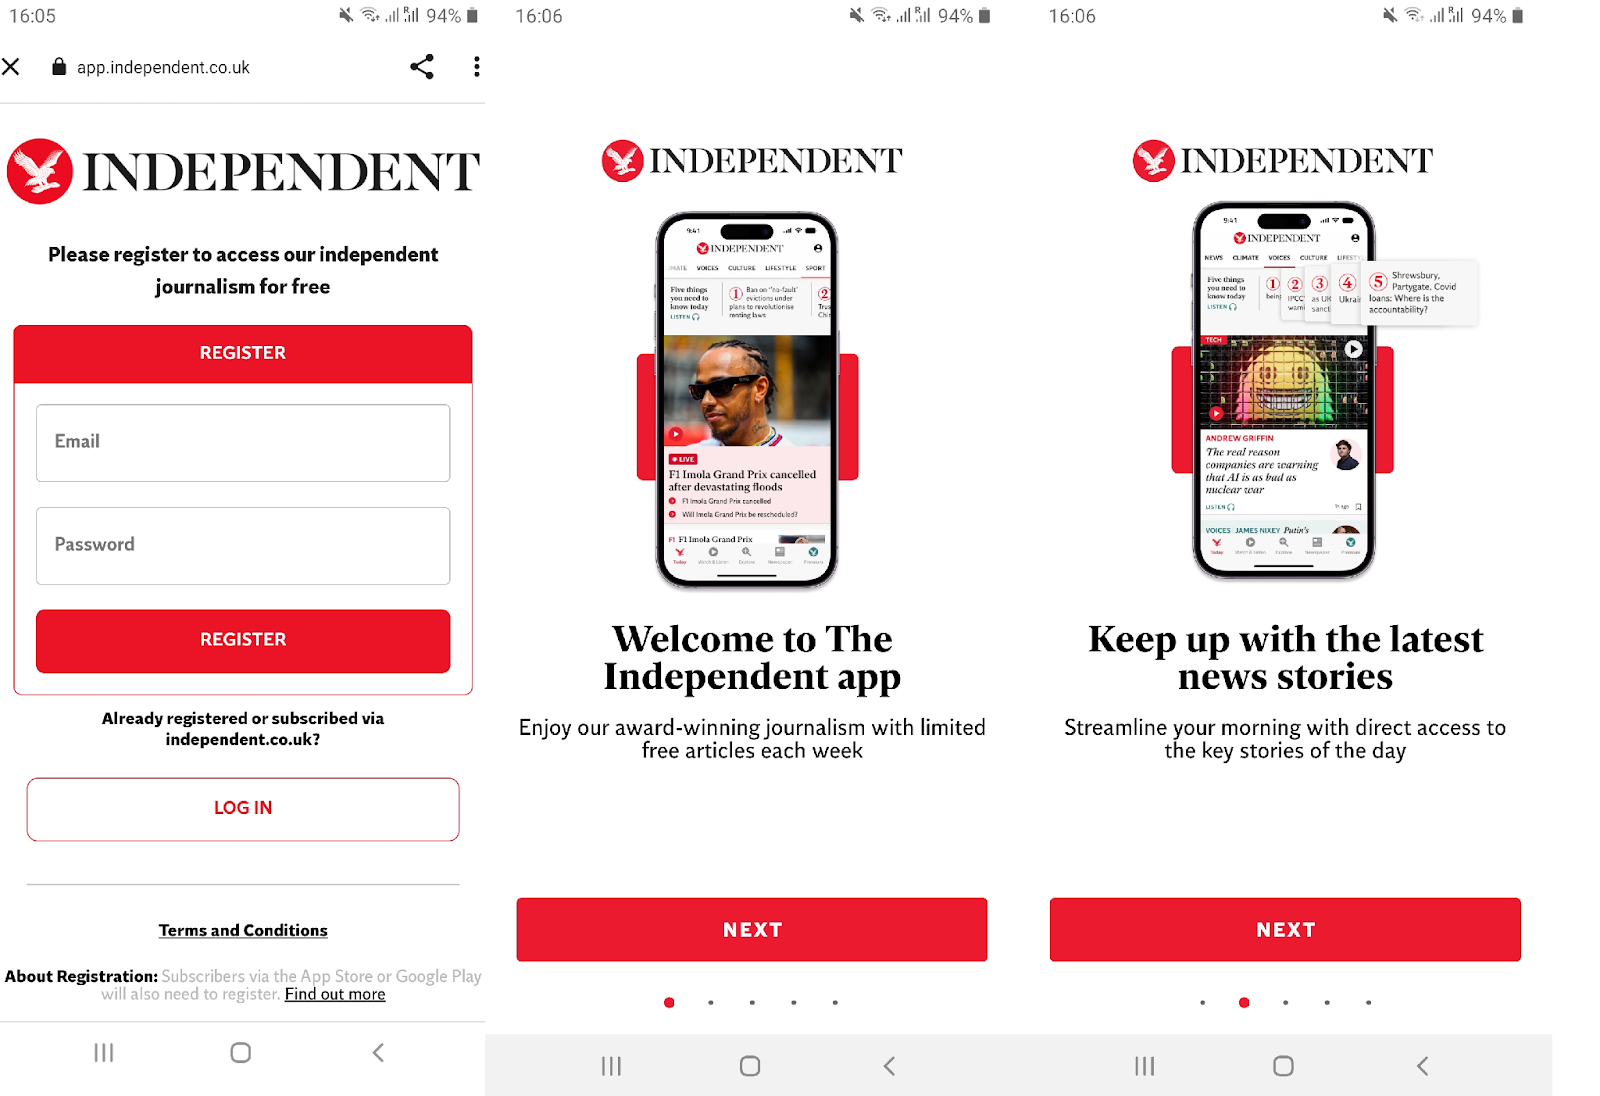 Best practices for publishers to convert readers into subscribers on-app